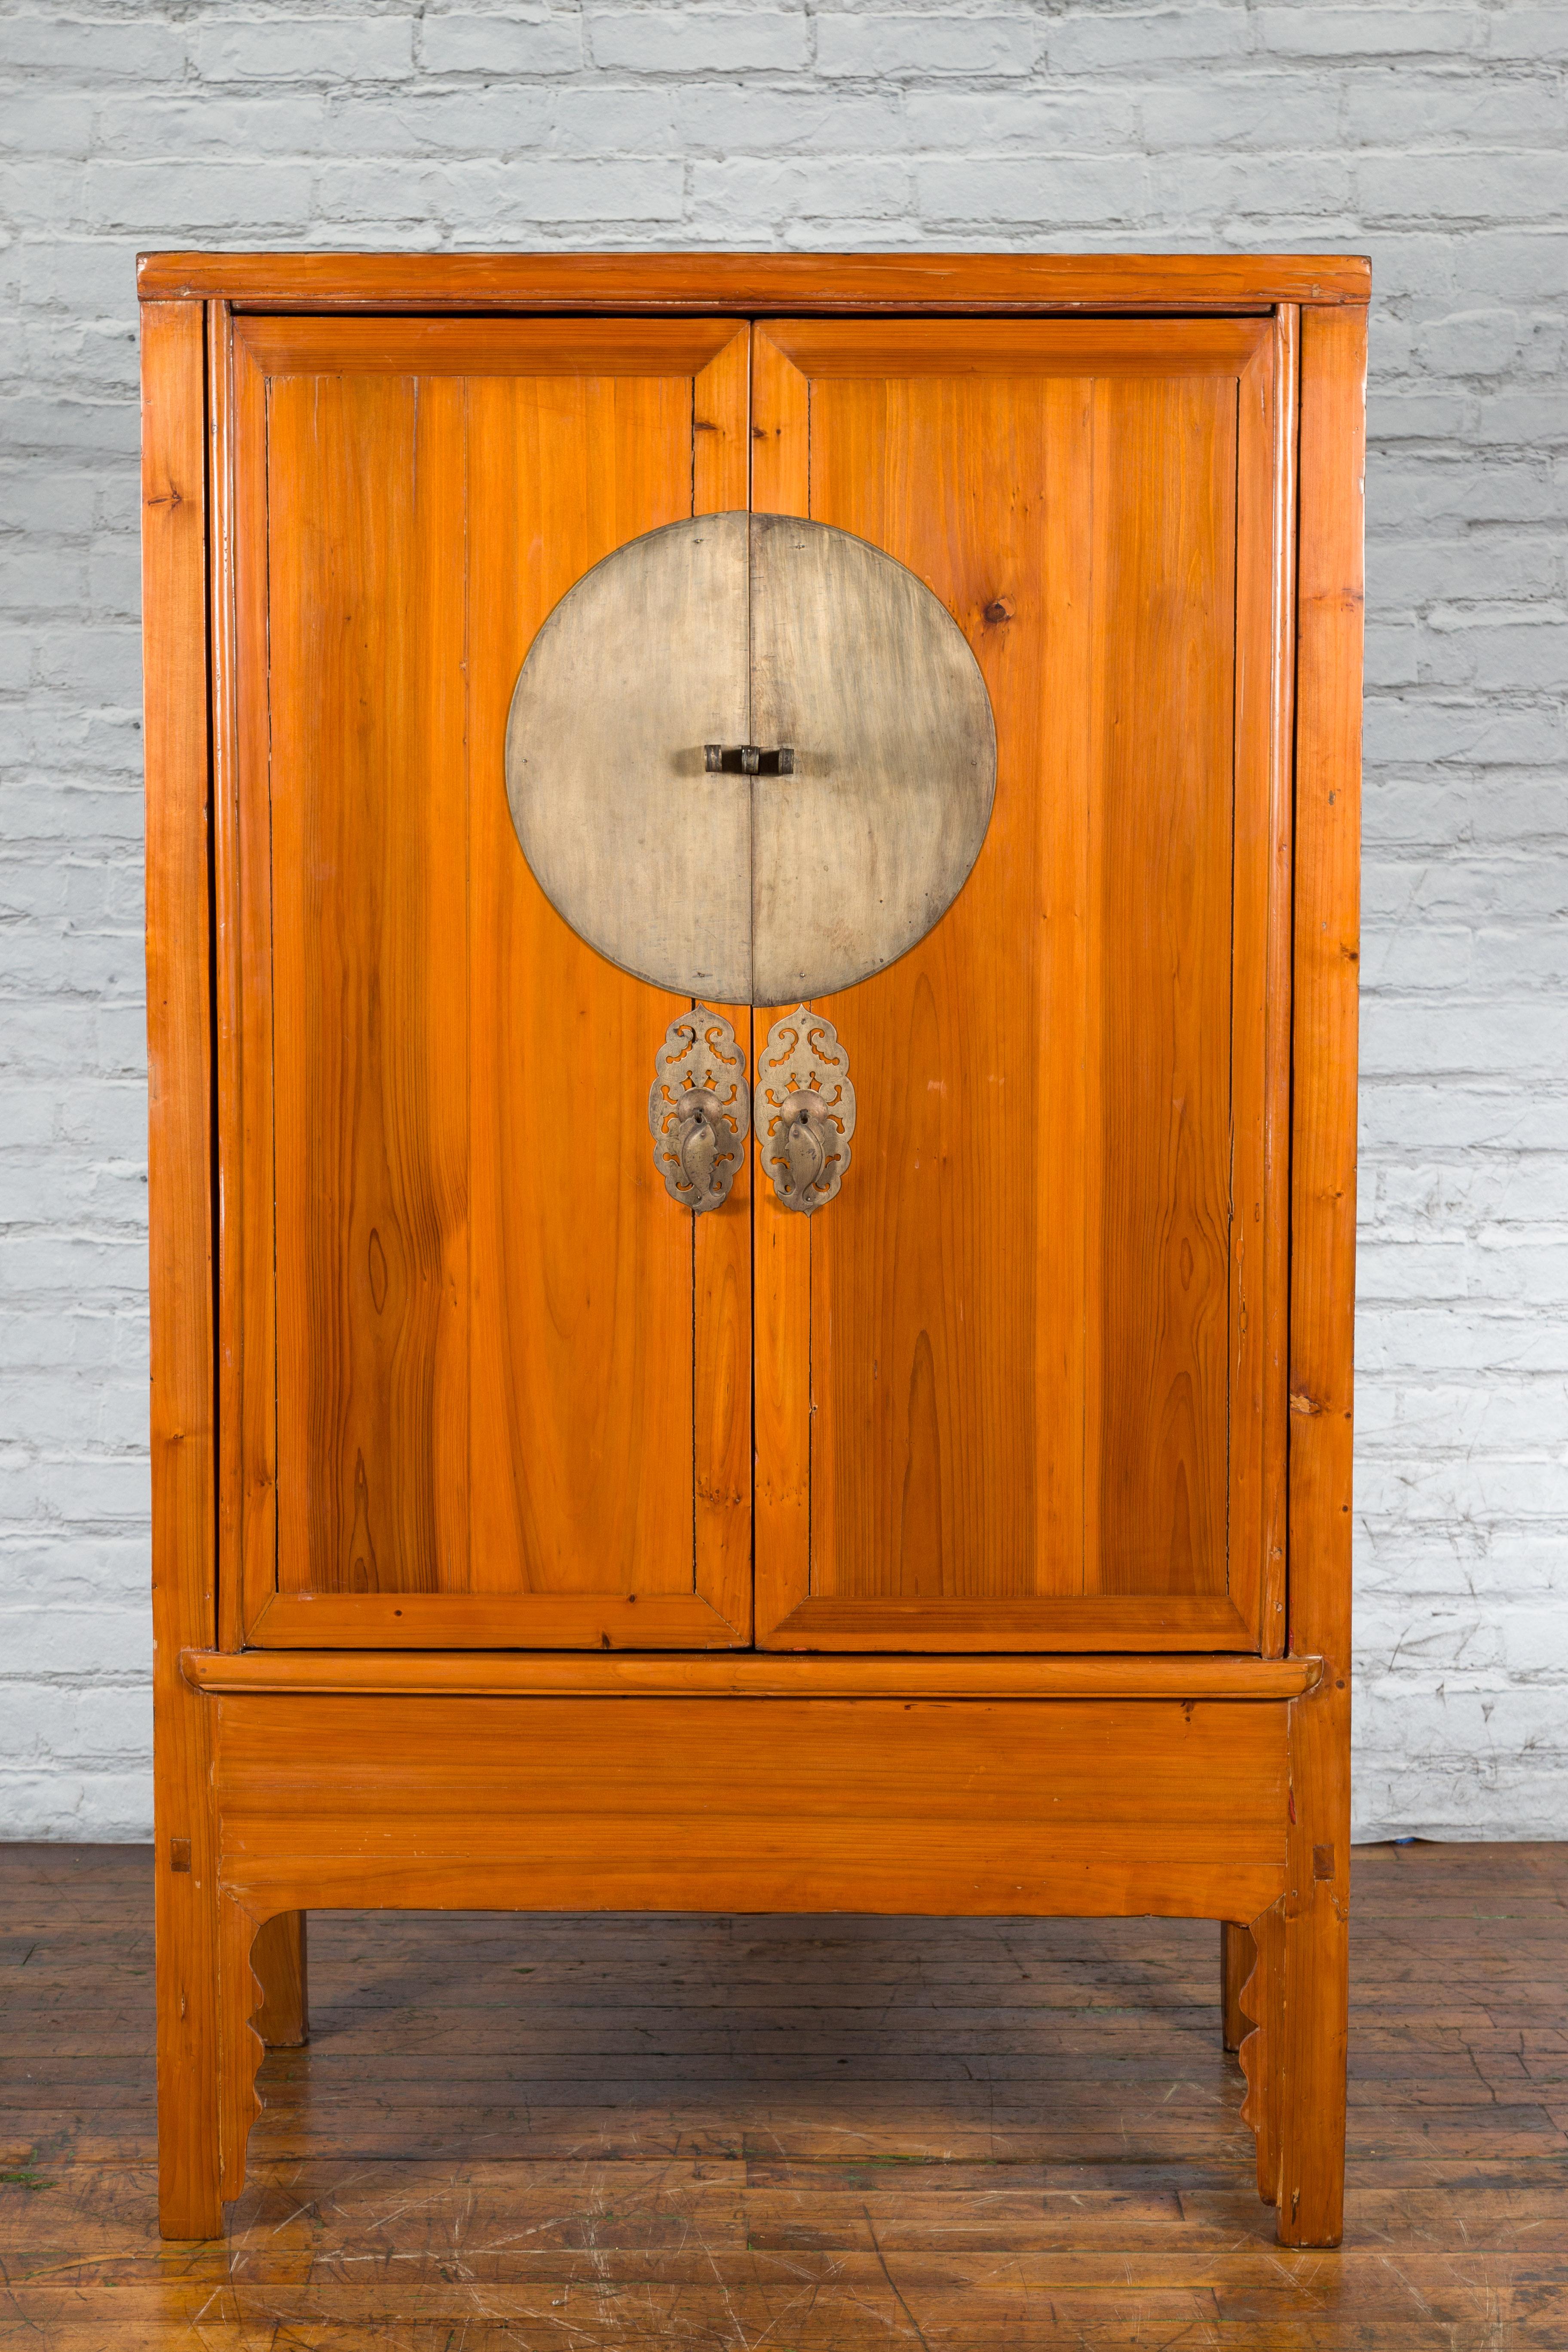 A large antique Chinese late Qing Dynasty period elmwood armoire from the early 20th century, with two doors, bronze medallion hardware, hidden drawers and carved apron. Created in China during the later years of the Qing Dynasty in the 20th